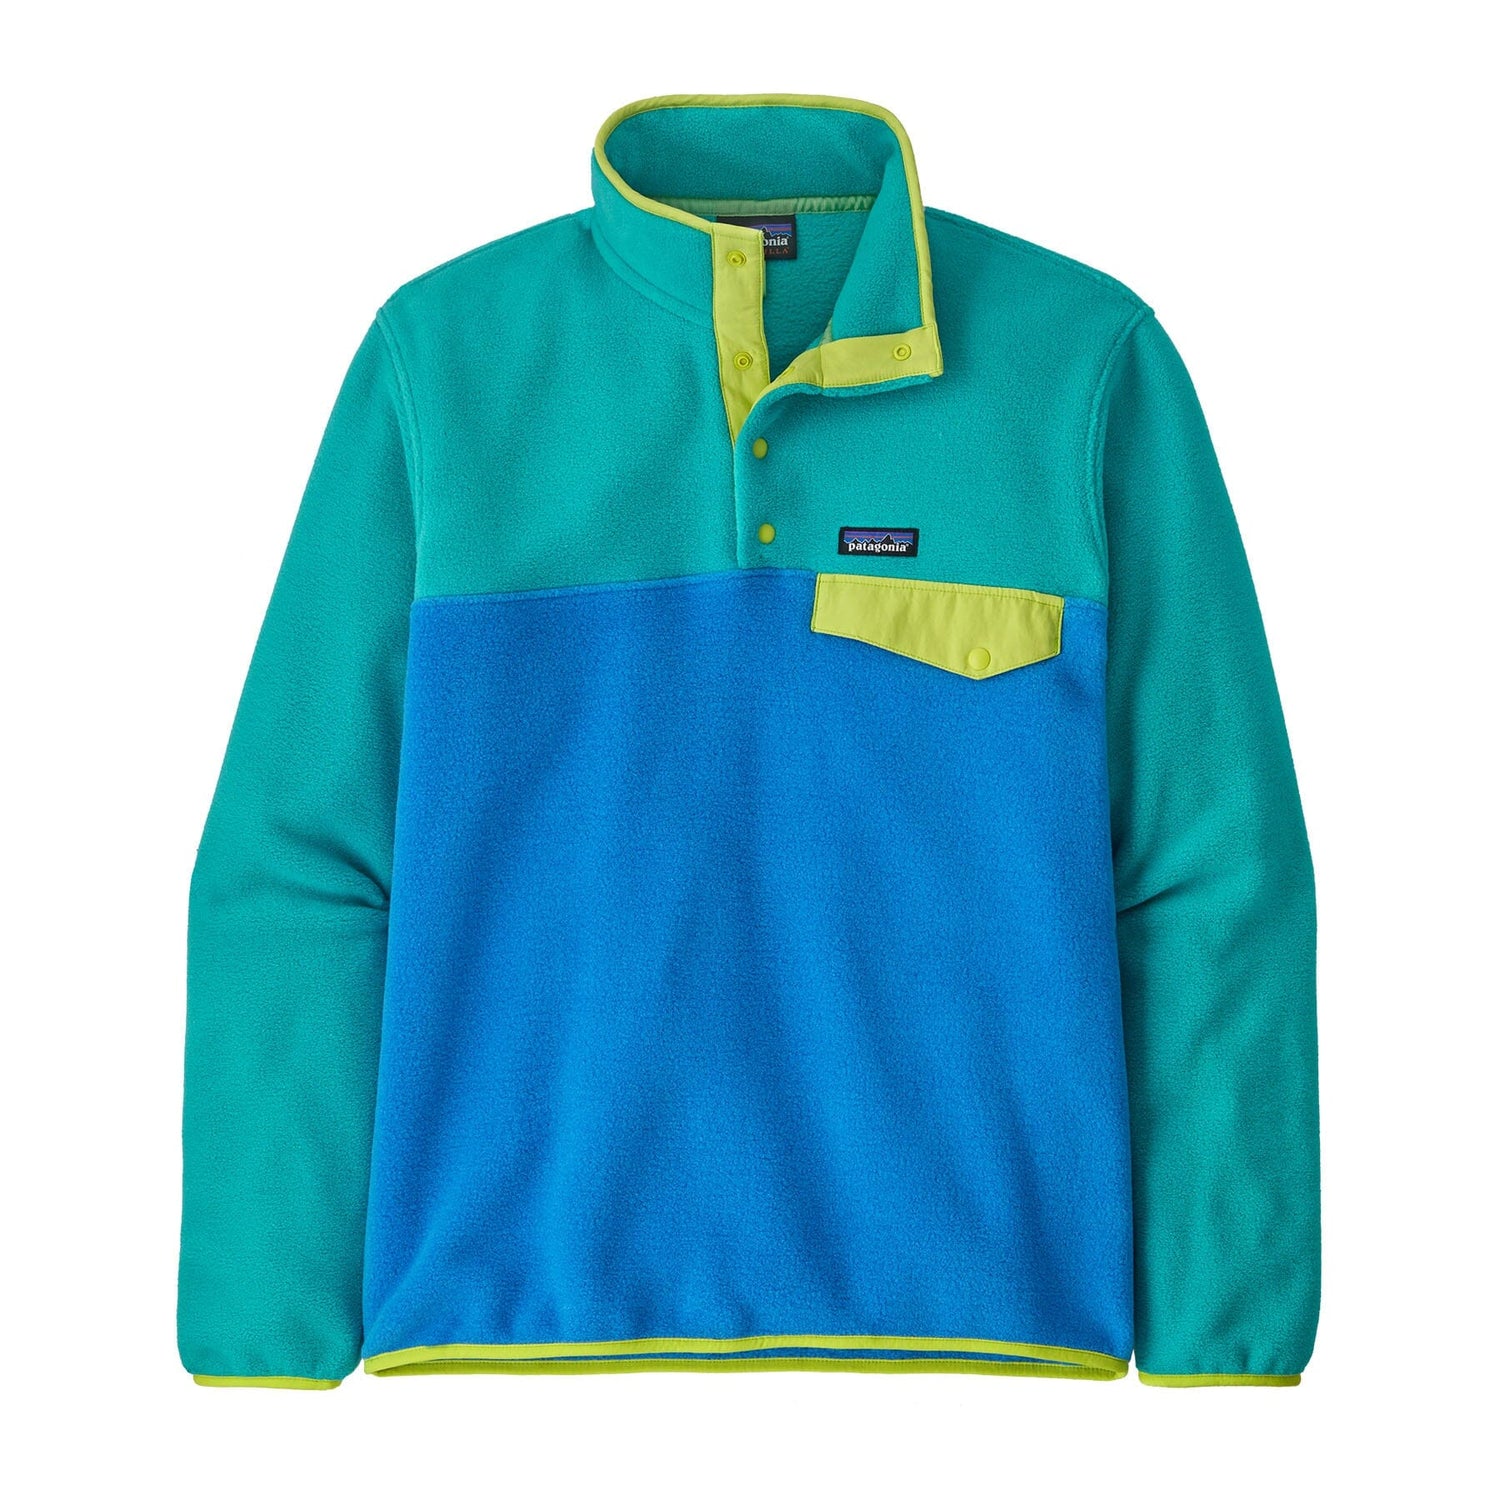 Patagonia M's LW Synch Snap-T Fleece Pullover - 100% Recycled Polyester Vessel Blue Shirt